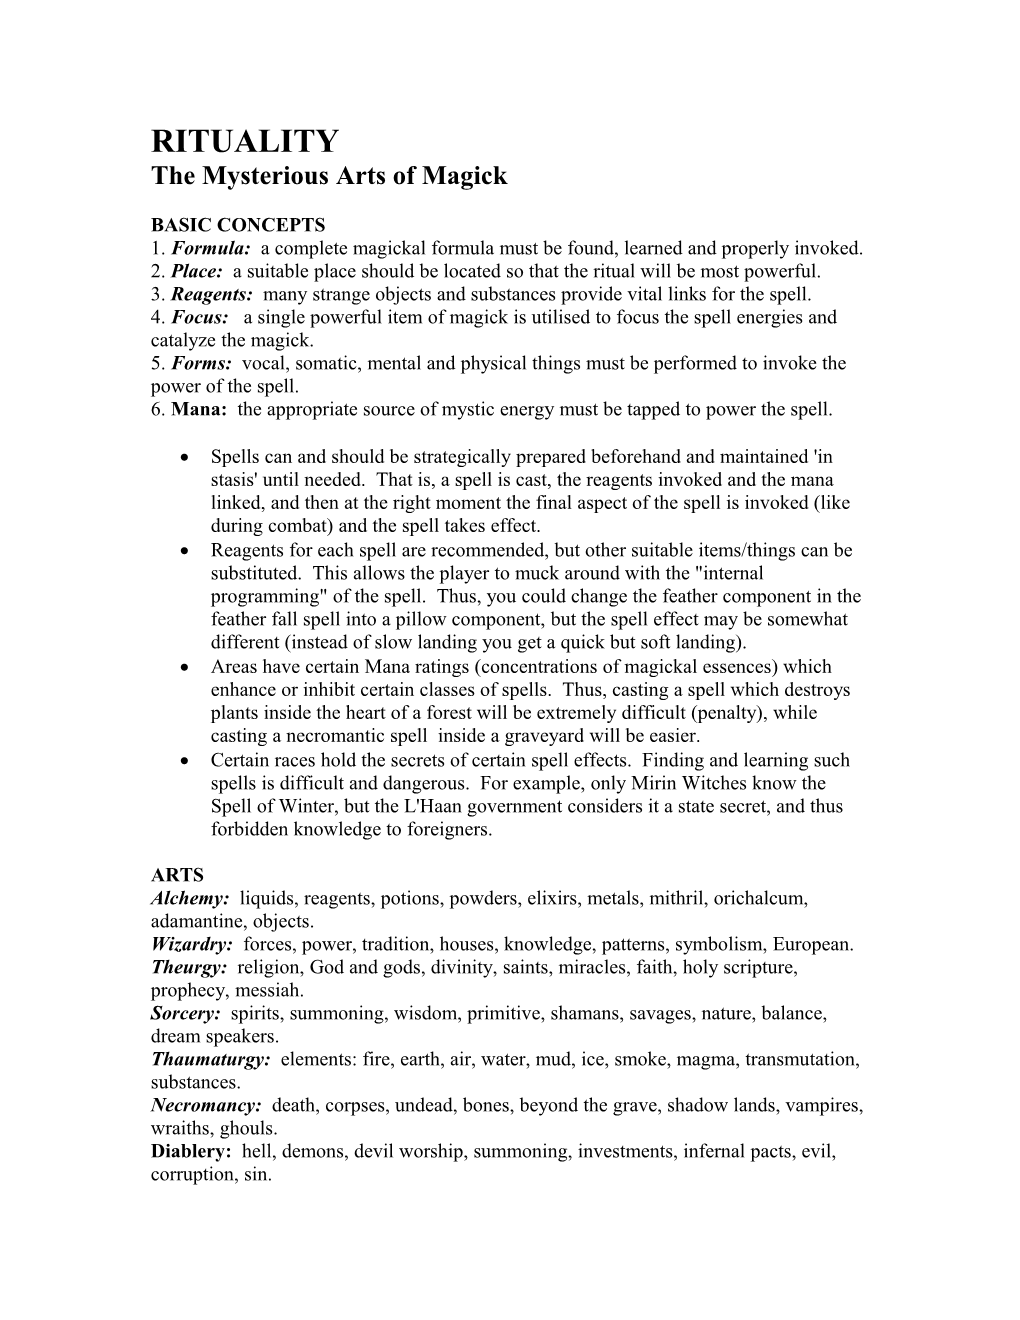 The Mysterious Arts of Magick